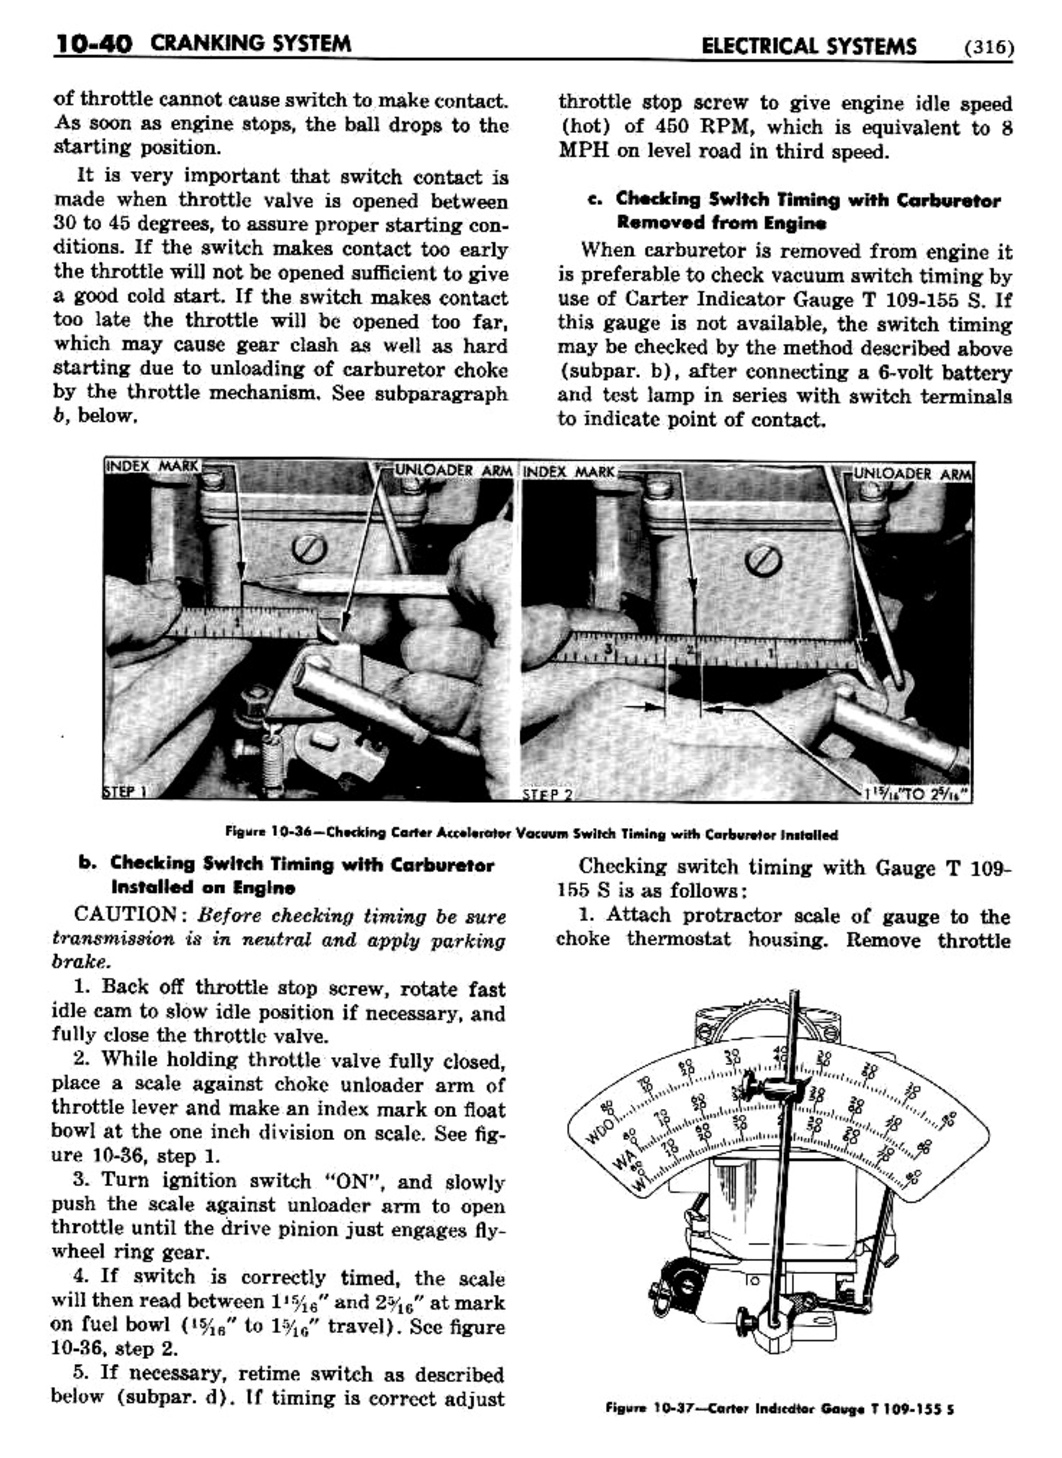 n_11 1948 Buick Shop Manual - Electrical Systems-040-040.jpg